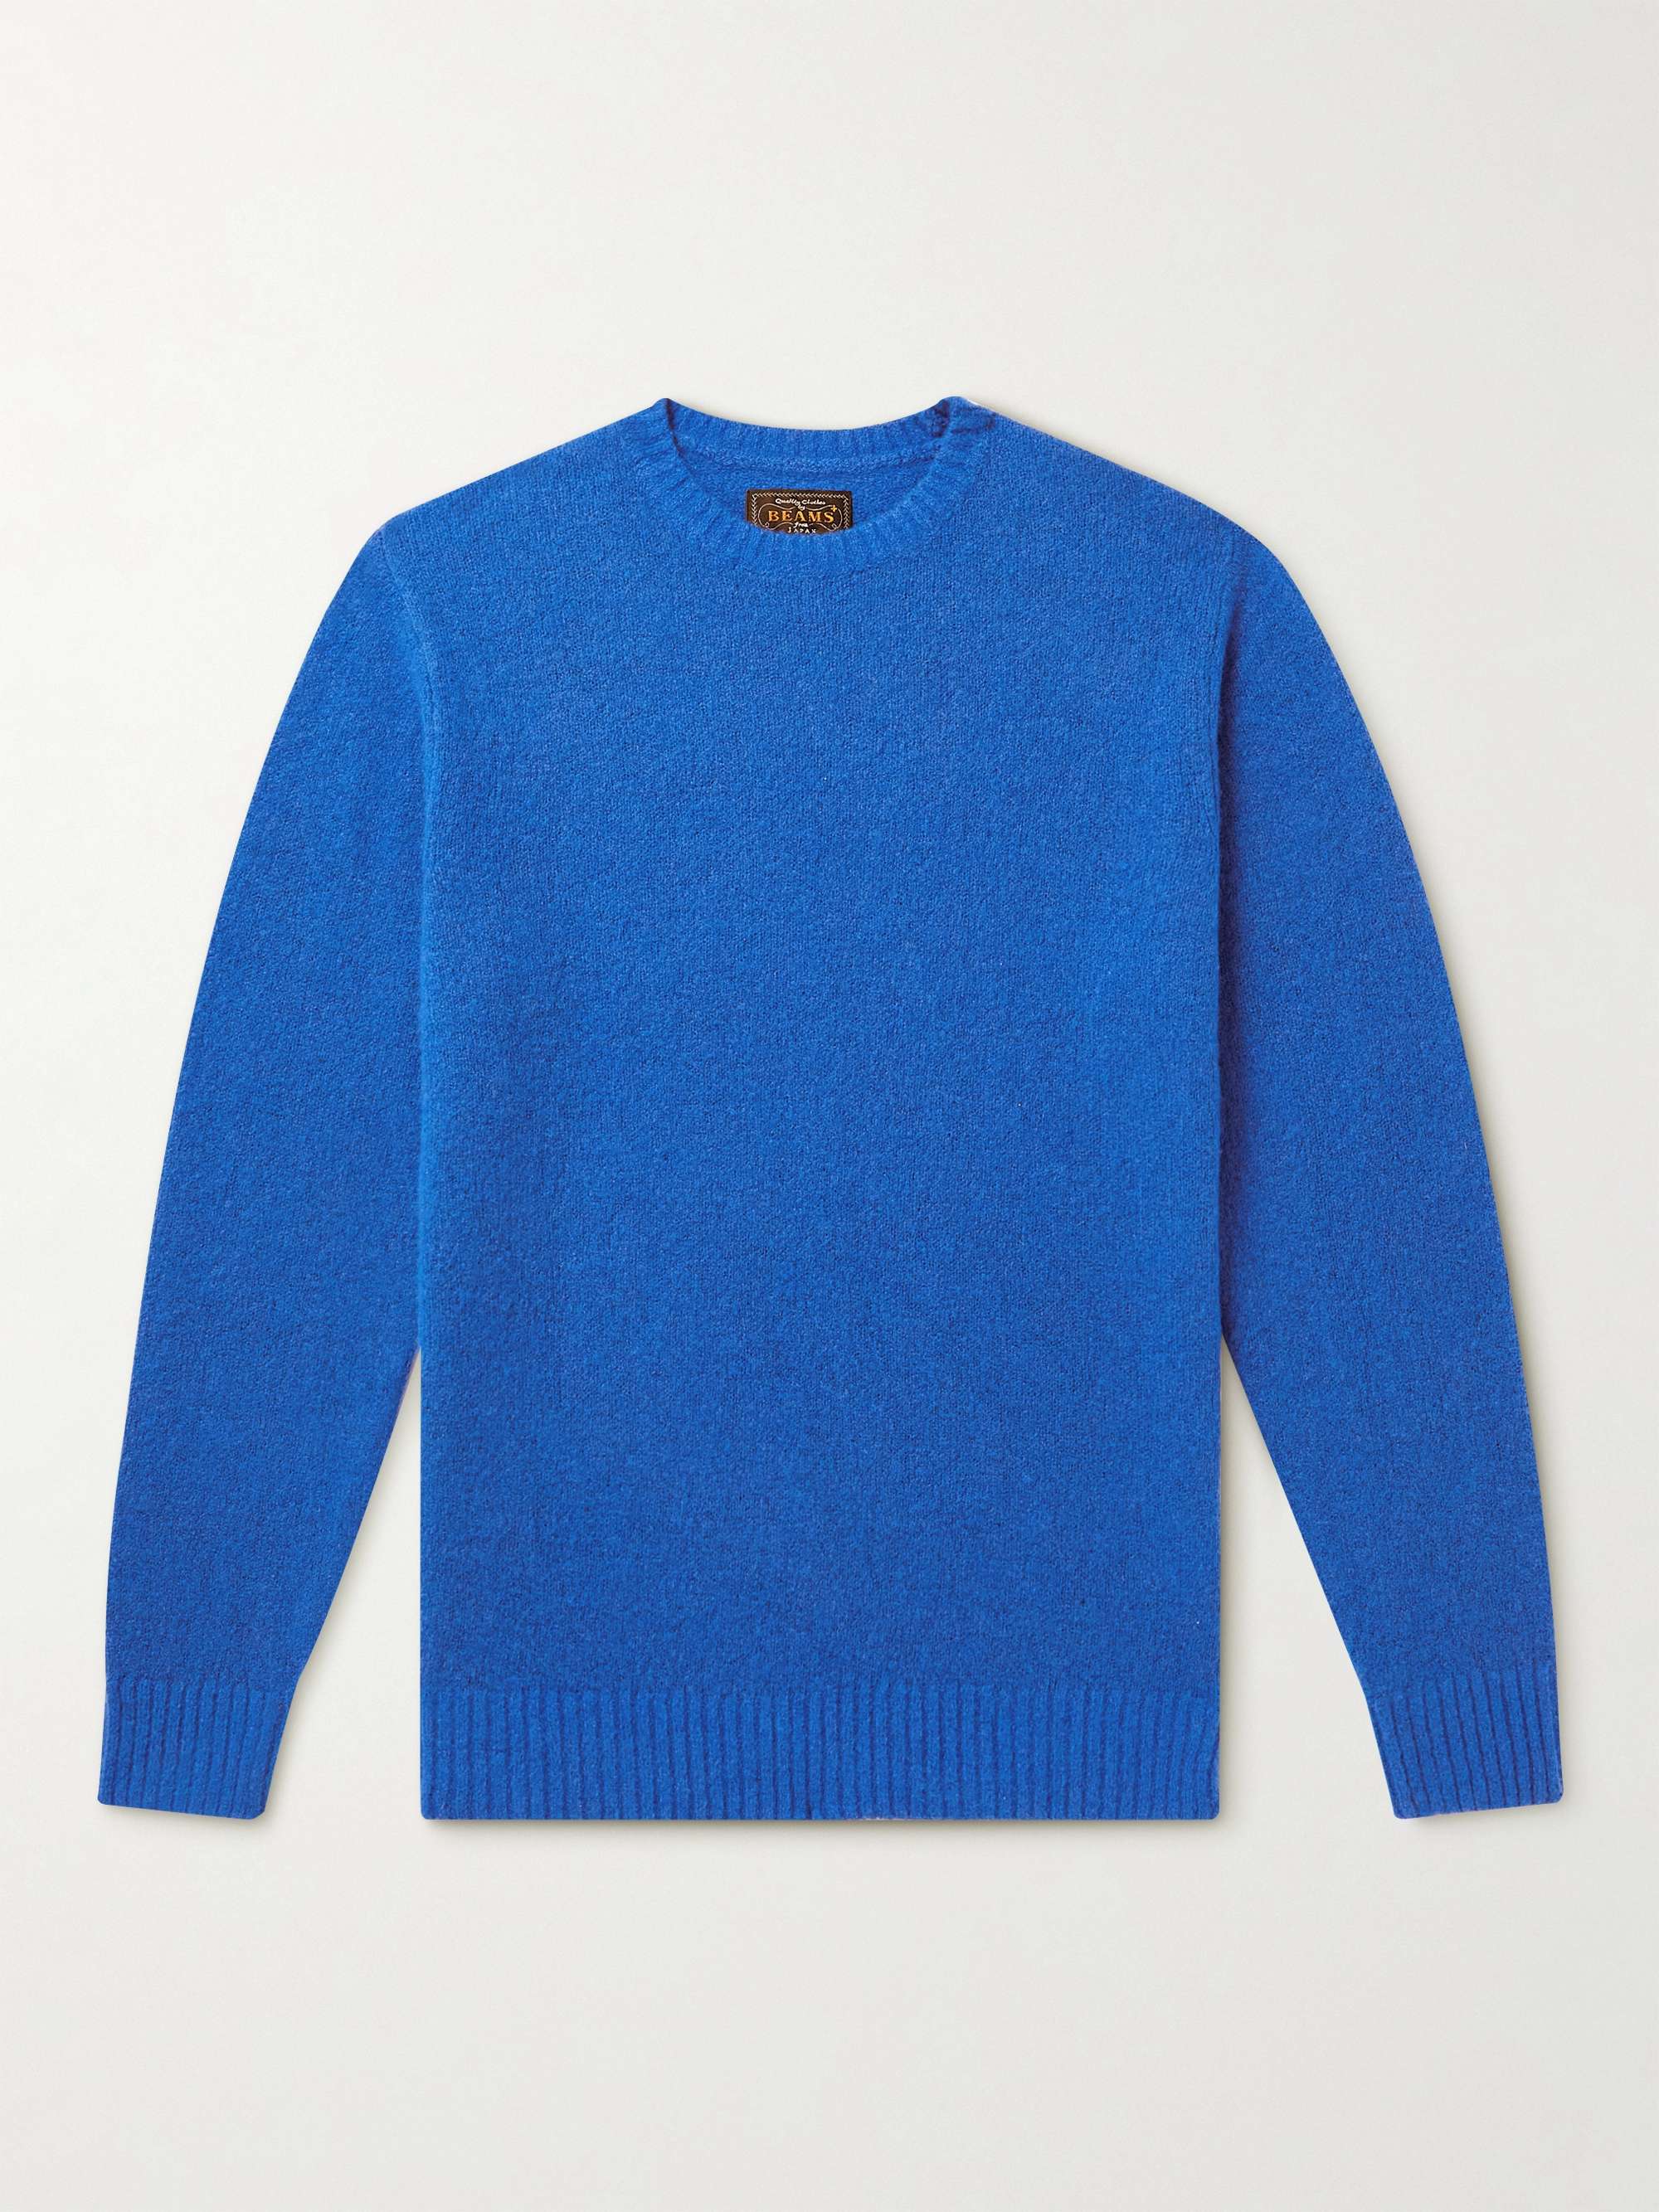 BEAMS PLUS Cashmere and Silk-Blend Sweater